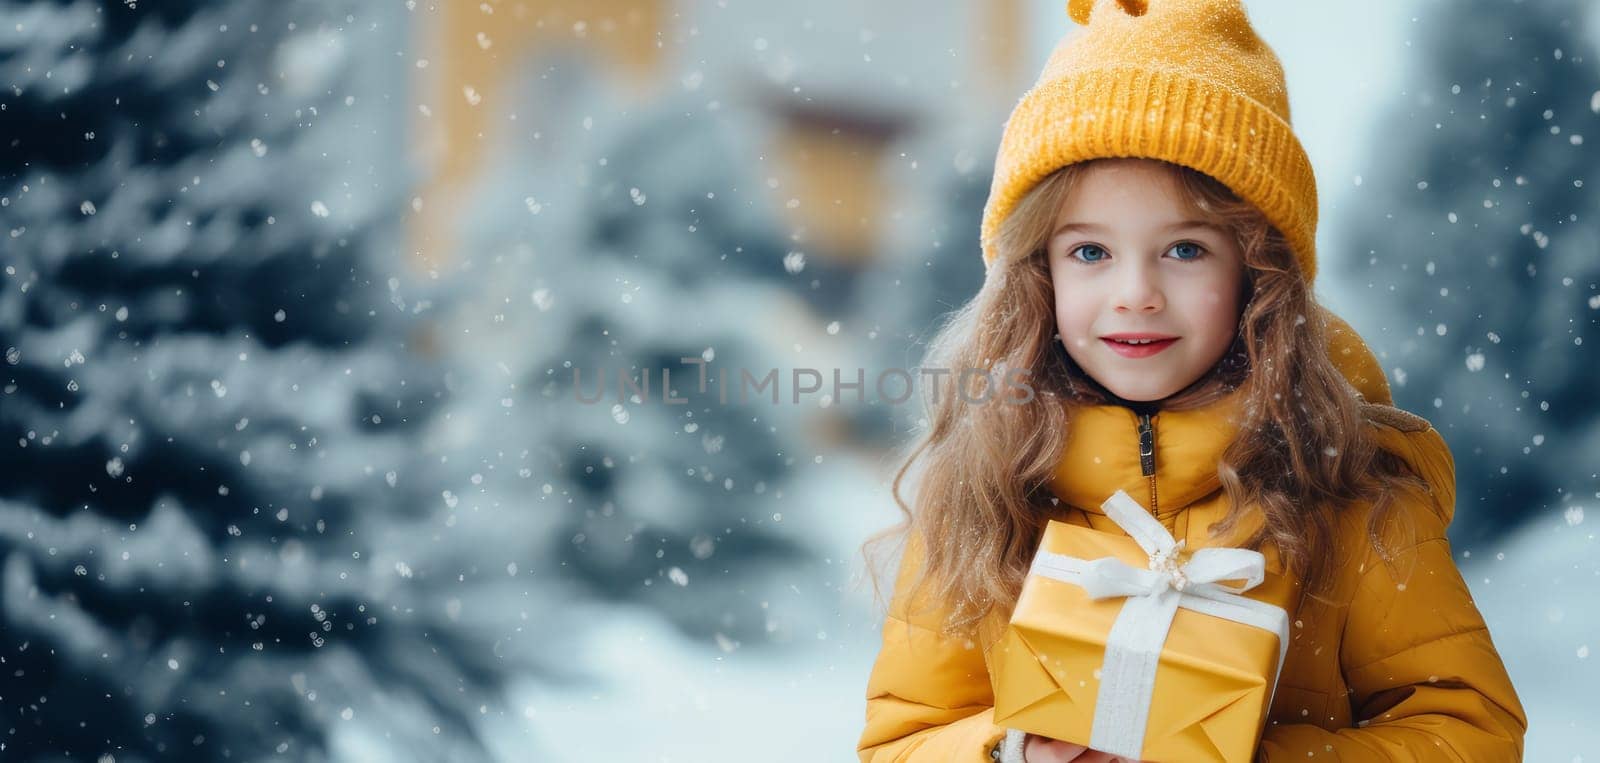 Pretty smiling girl holding Christmas gifts while standing against background of decorated Christmas tree outdoors wearing yellow outerwear on snowy winter holiday day.